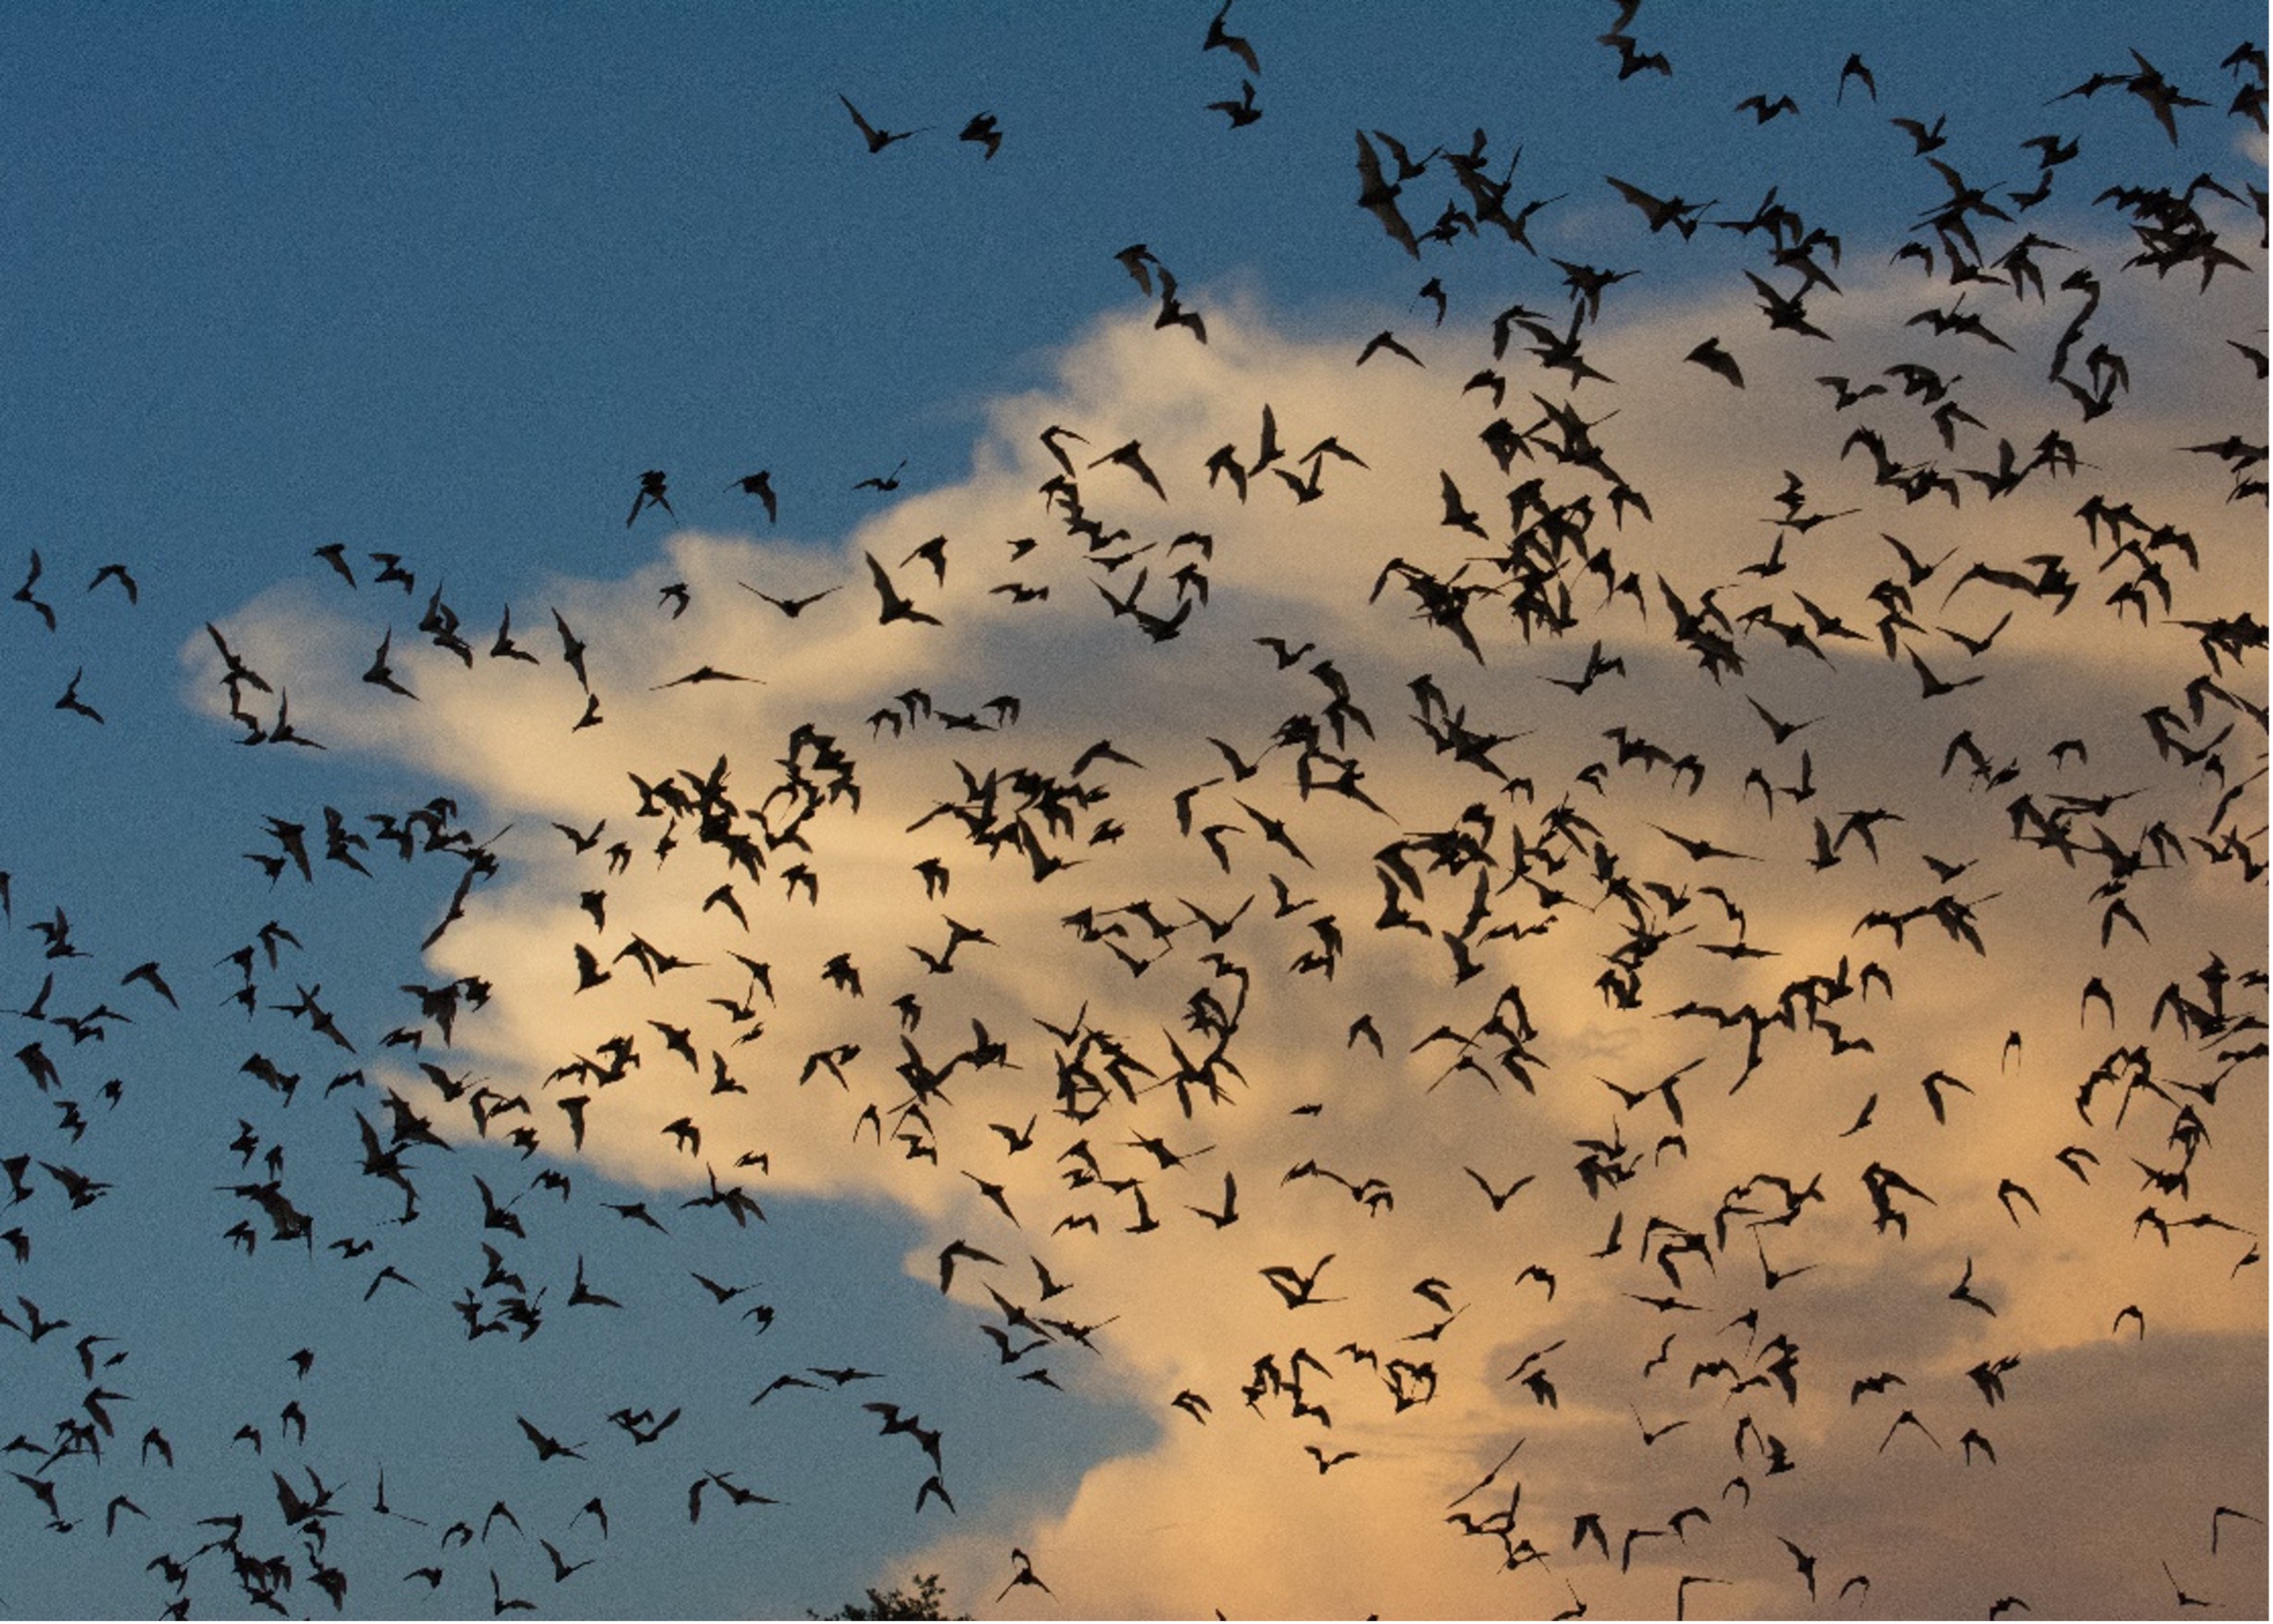 Mexican free tail bats swarming in the sky